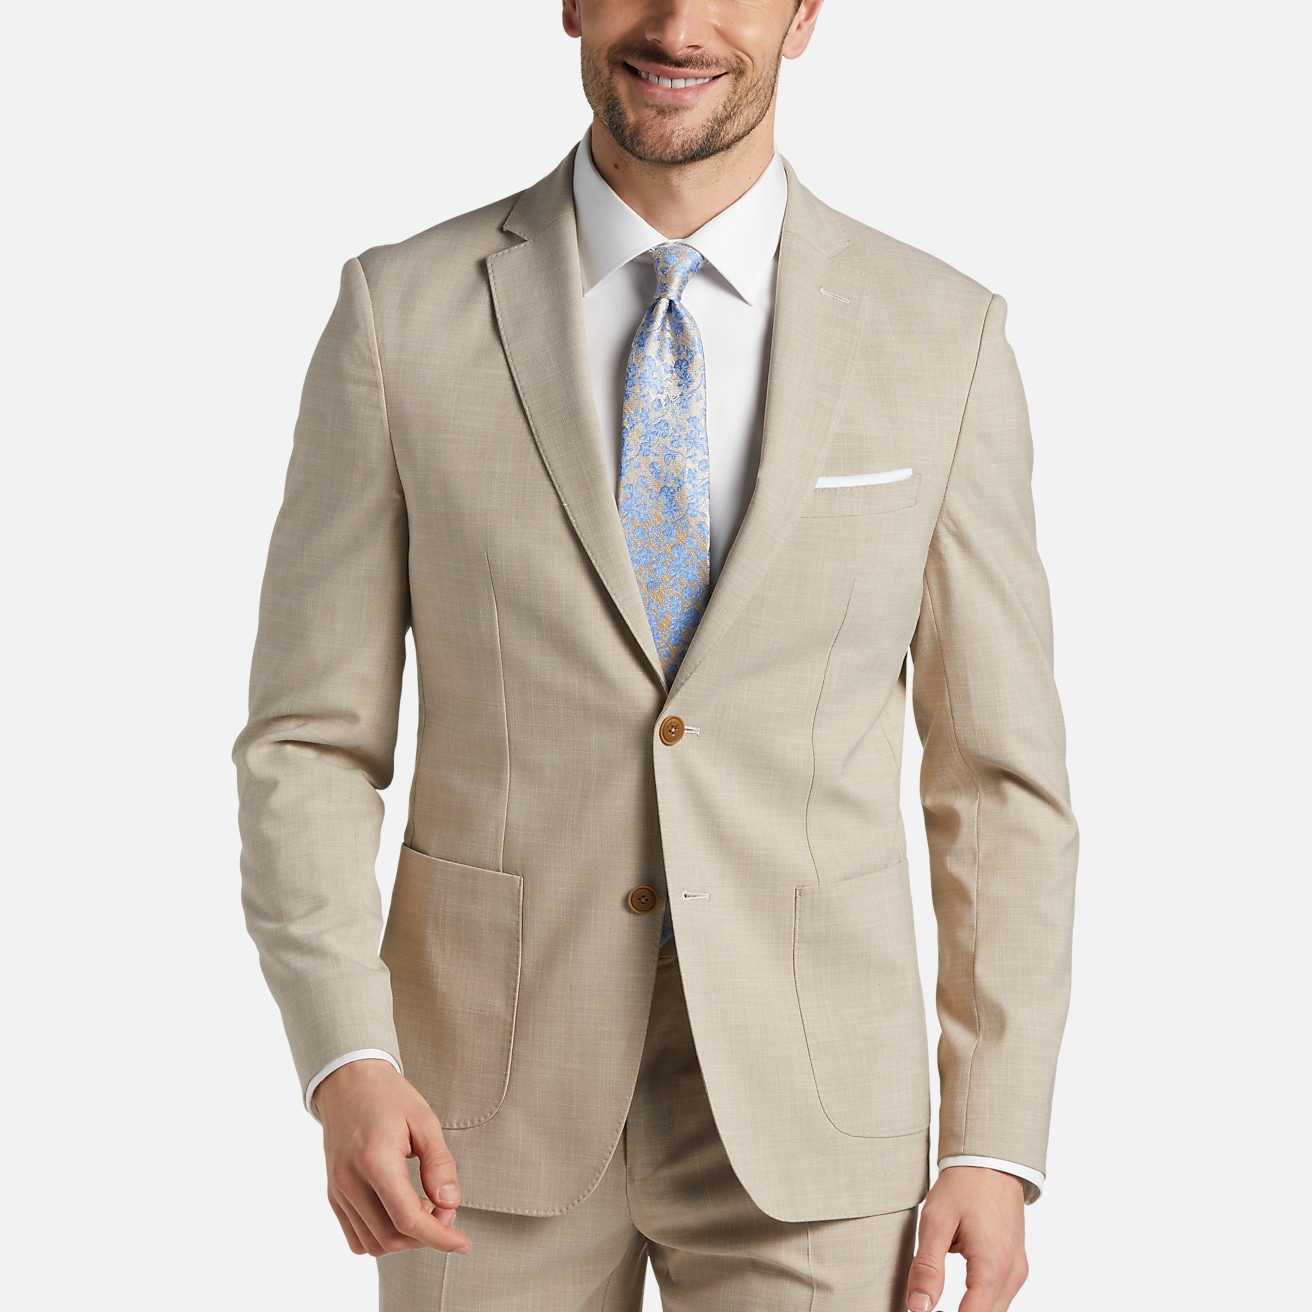 Michael Kors Modern Fit Suit Separates Jacket, All Clothing